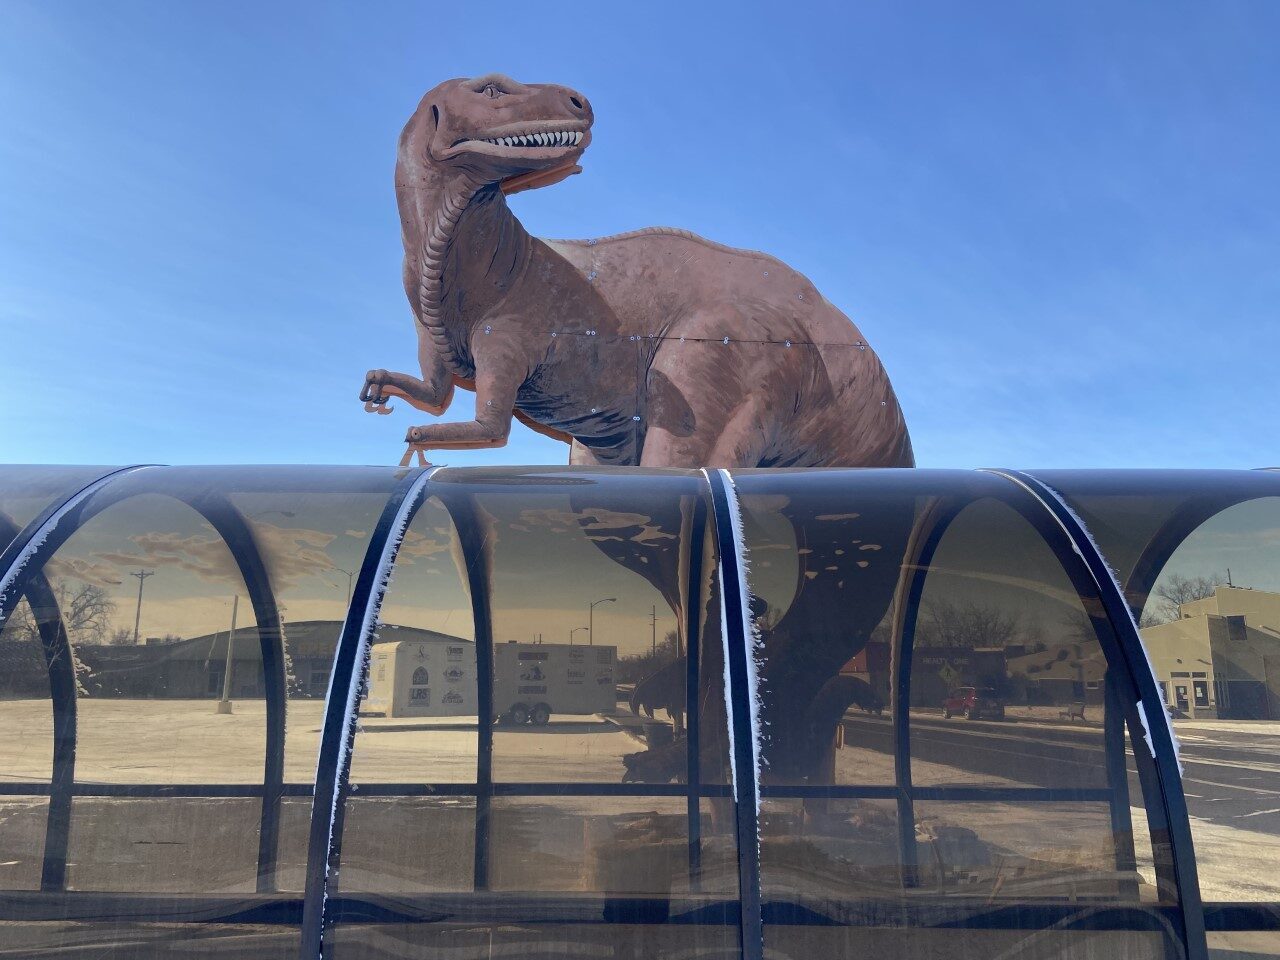 Glendive is a major stop on the Montana Dinosaur Trail